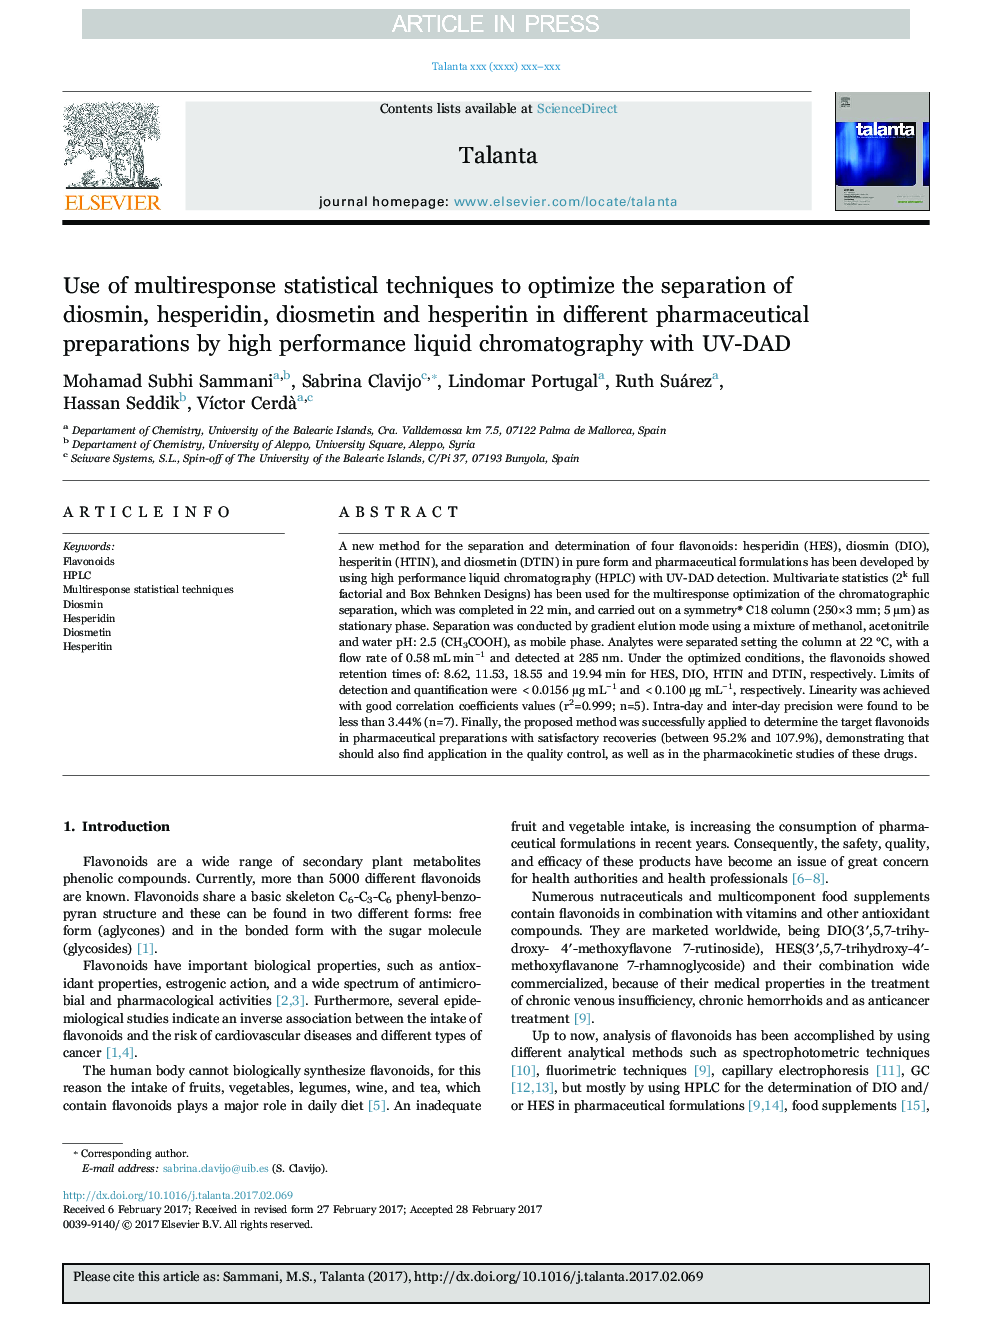 Use of multiresponse statistical techniques to optimize the separation of diosmin, hesperidin, diosmetin and hesperitin in different pharmaceutical preparations by high performance liquid chromatography with UV-DAD